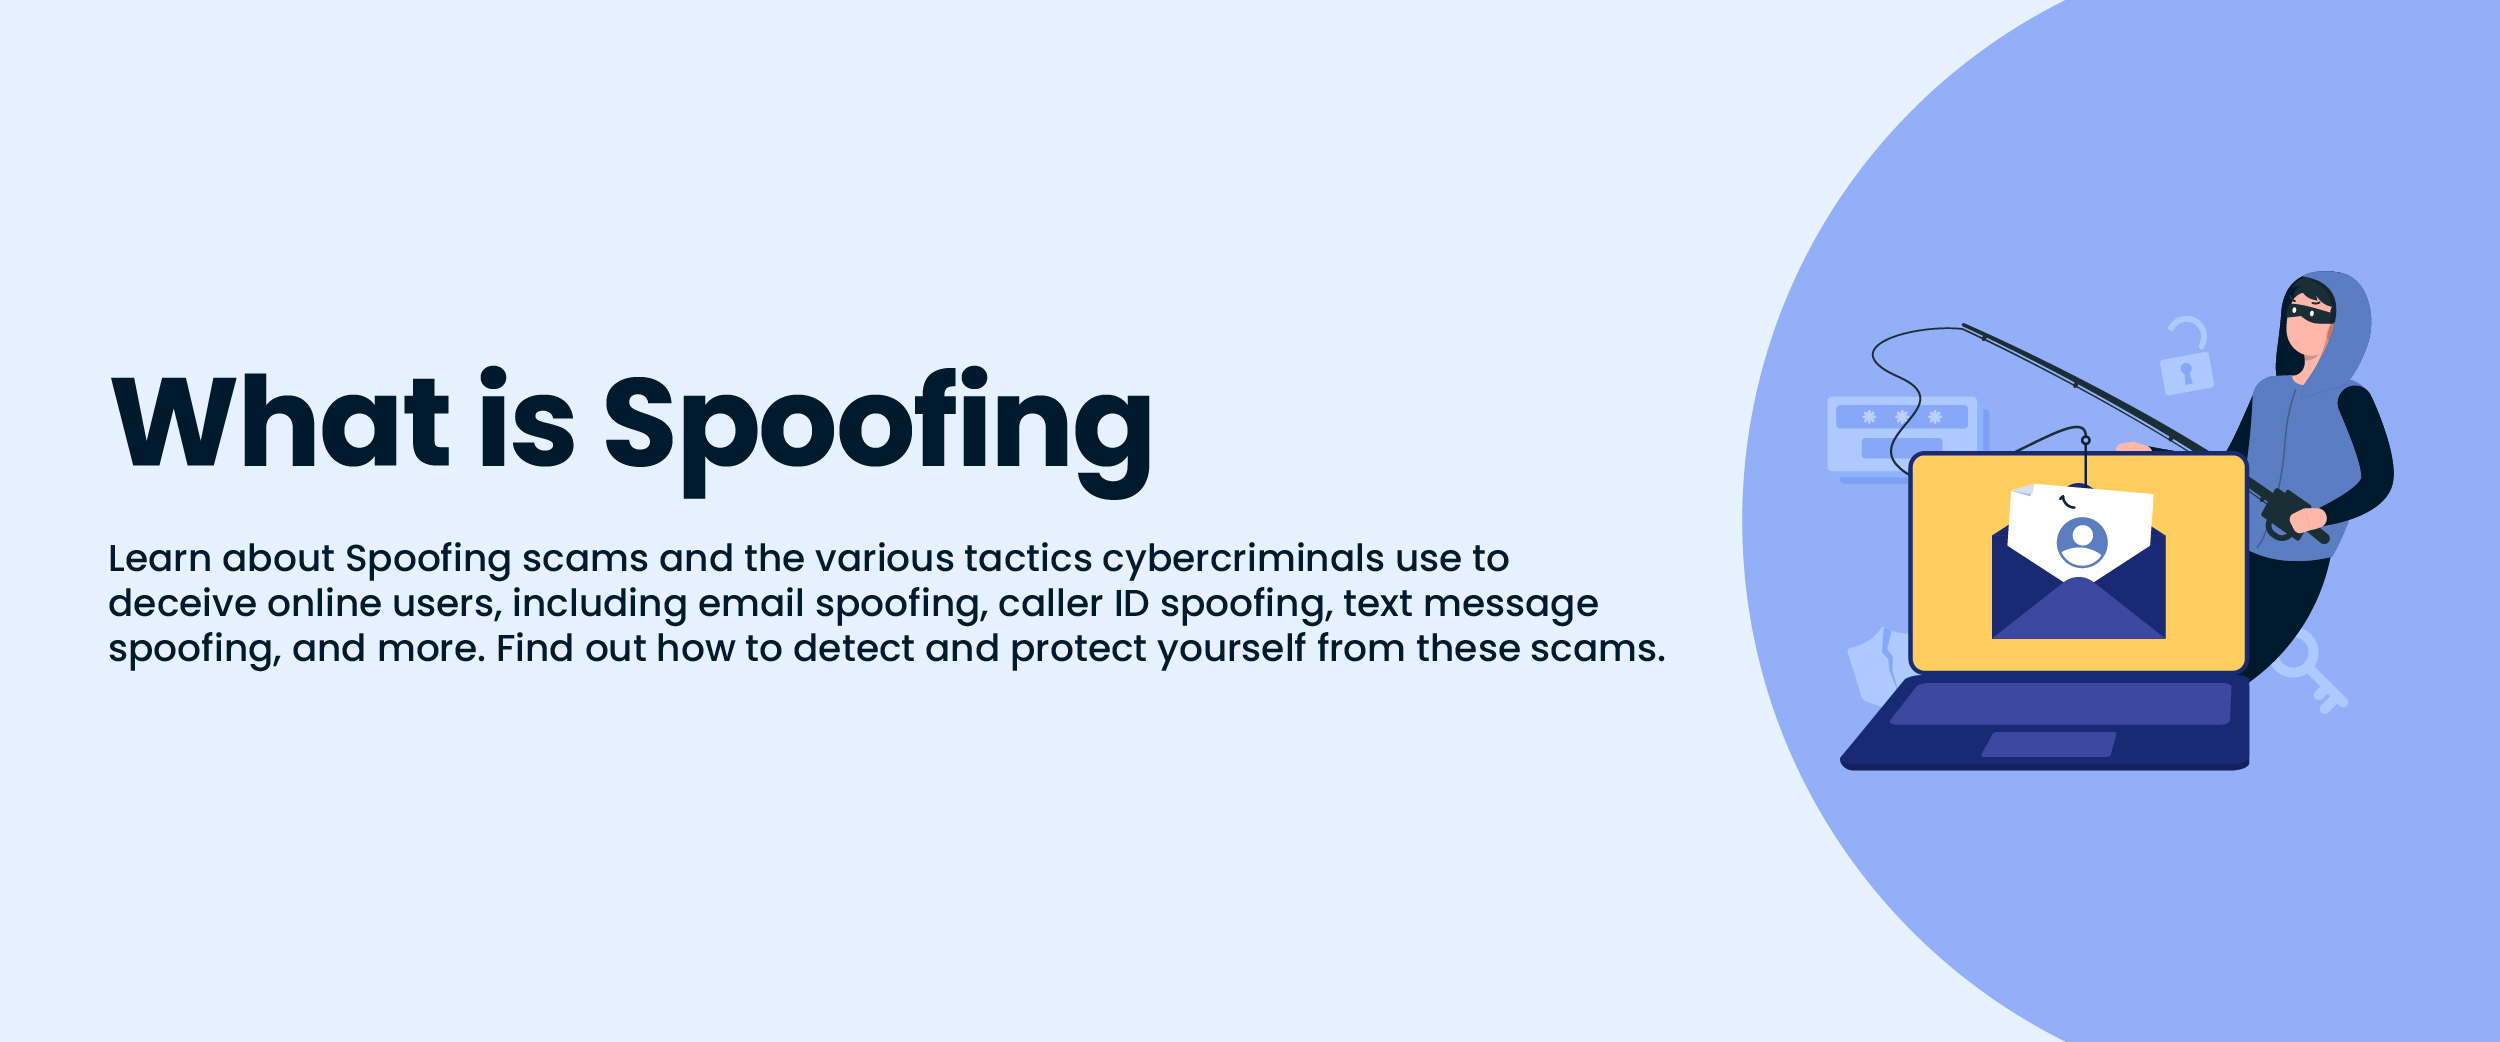 What Is Spoofing In Cybersecurity?